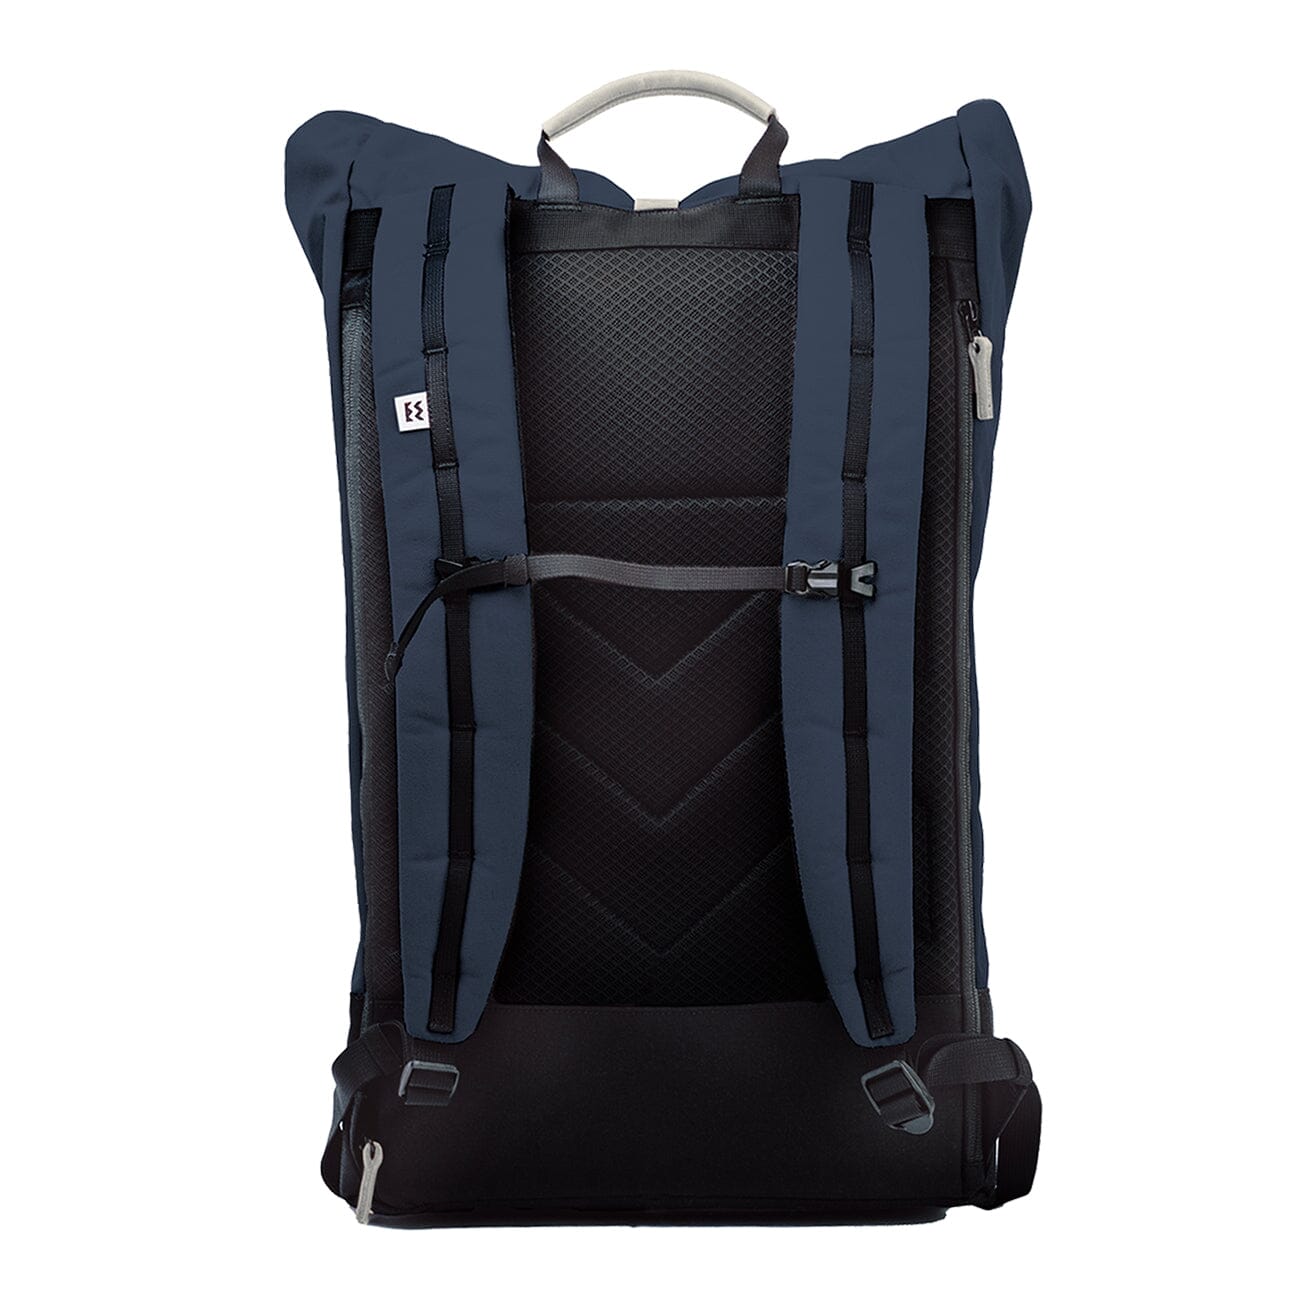 back view of the recycled plastic backpack in navy blue color from mero mero brand